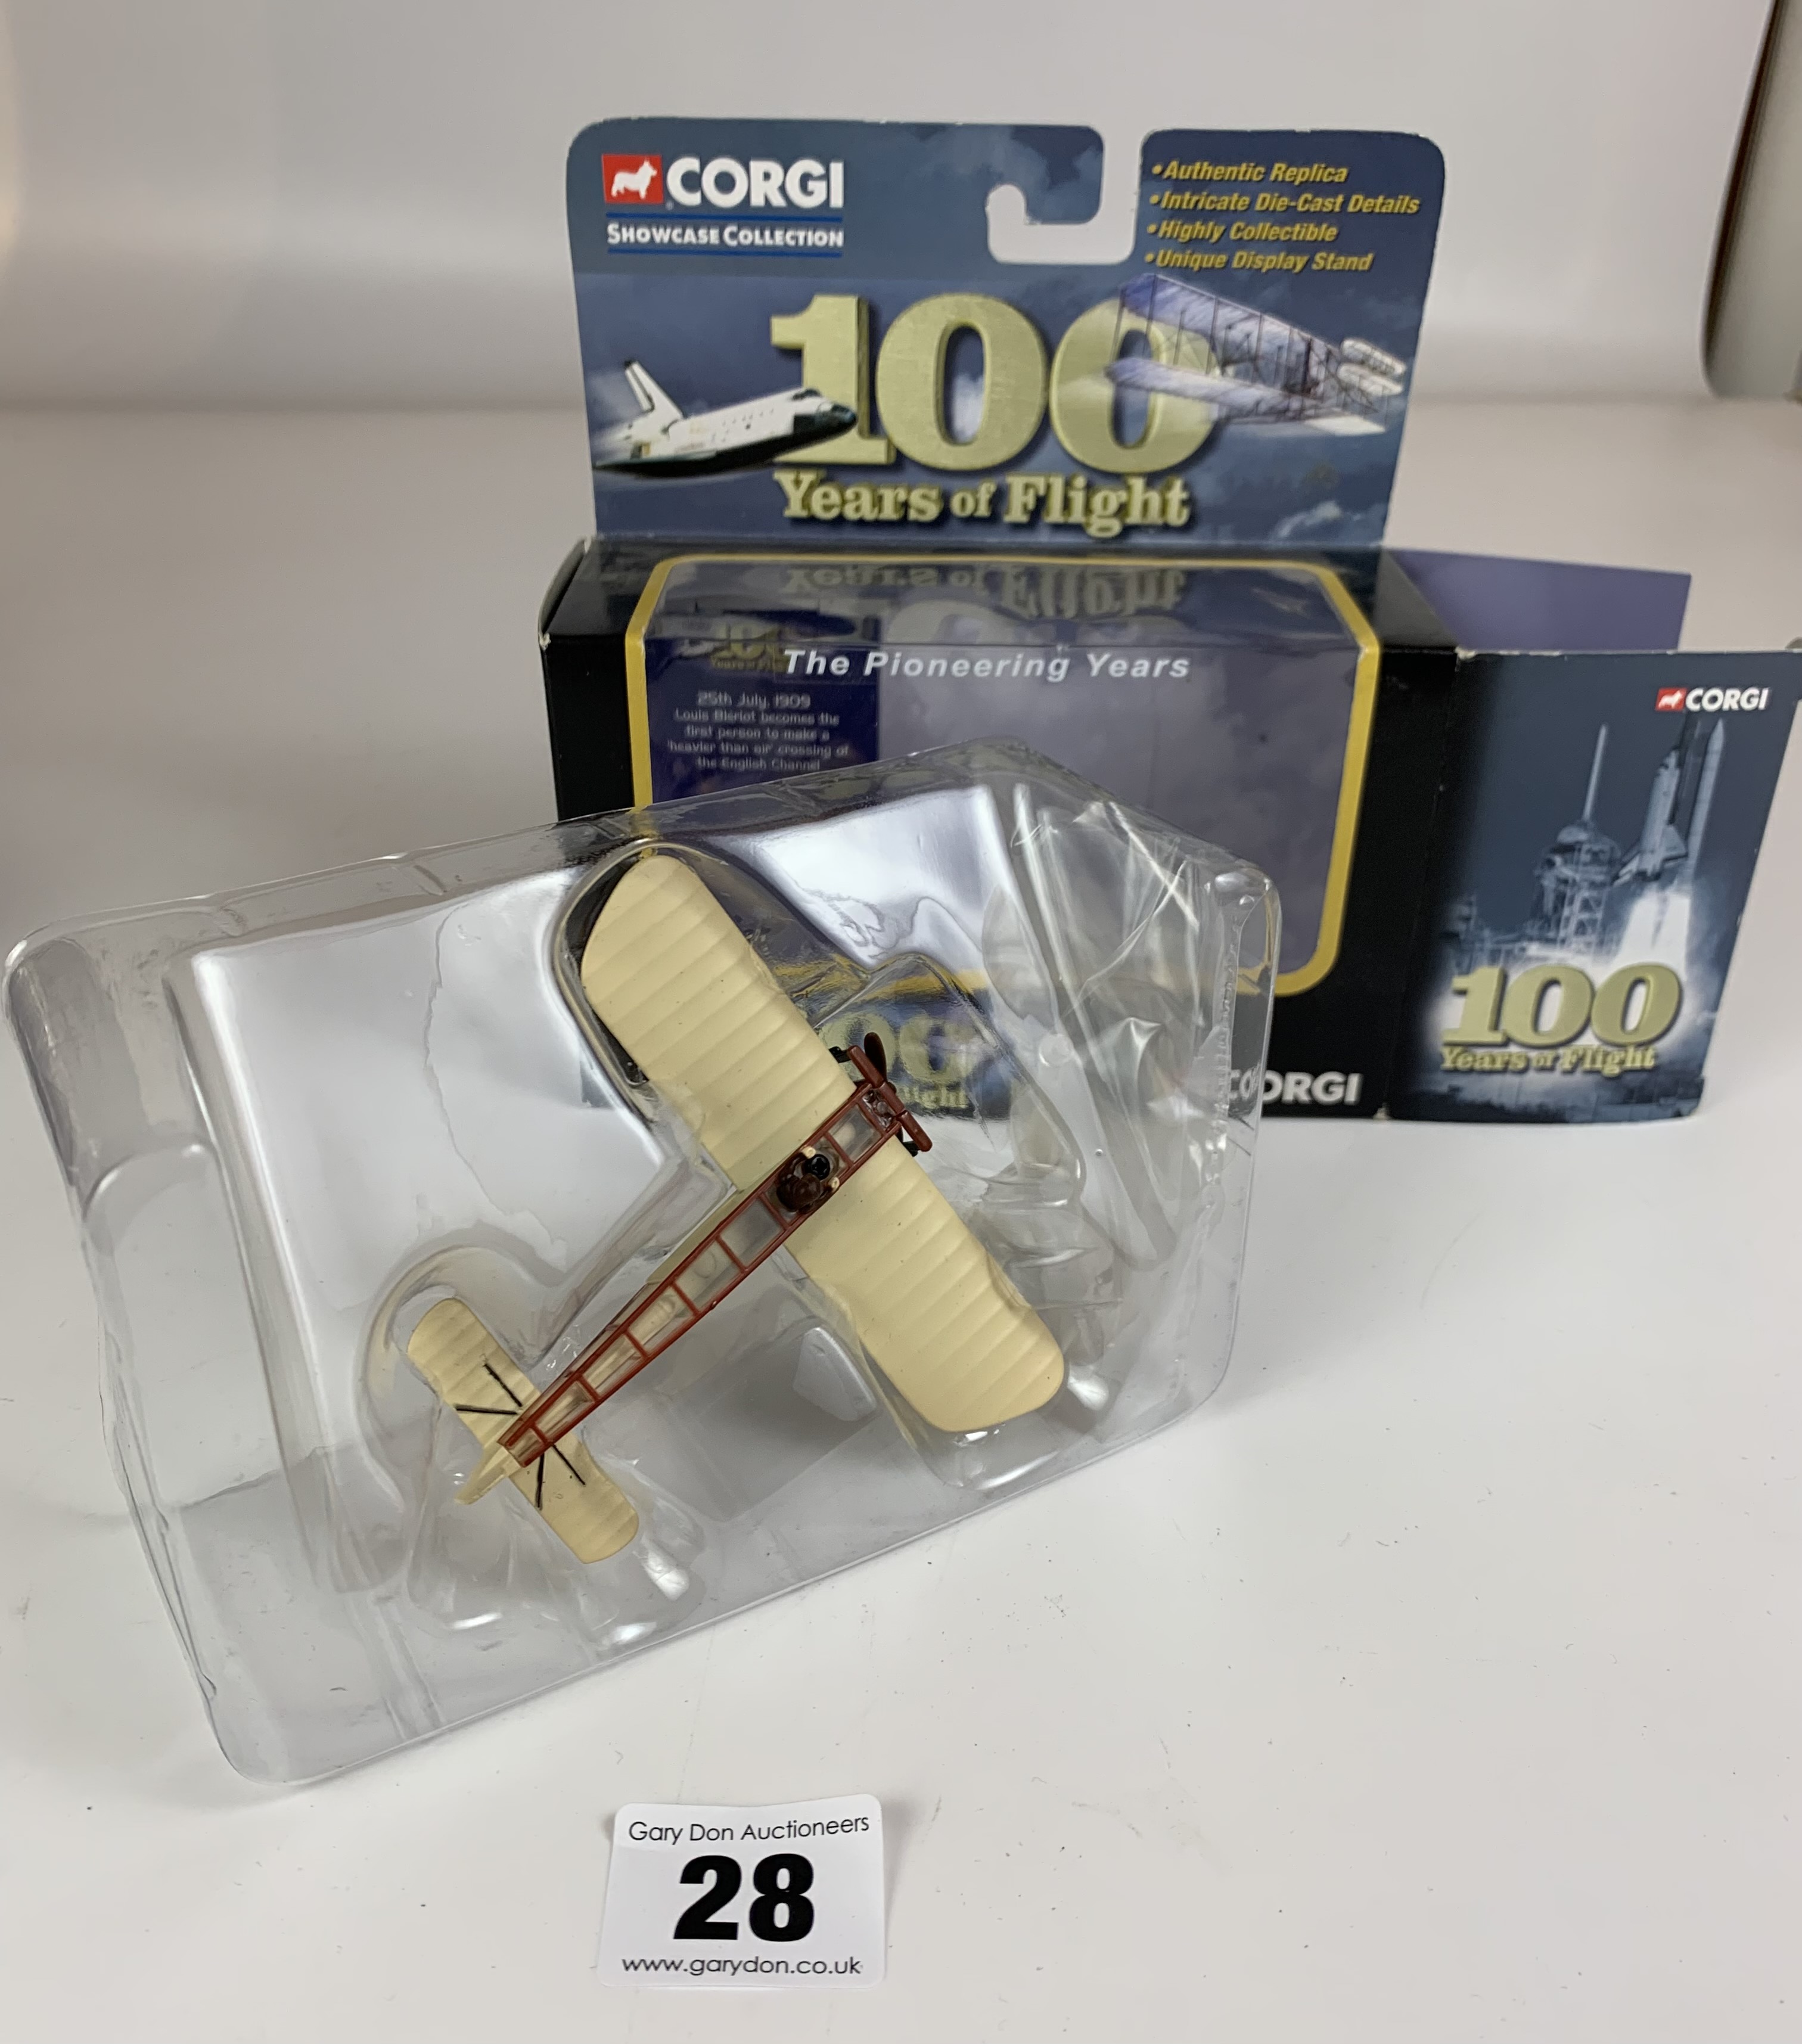 Boxed Corgi Showcase Collection Louis Bleriot XI Monoplane, Boxed Classic Fighter and Boxed Corgi - Image 8 of 8